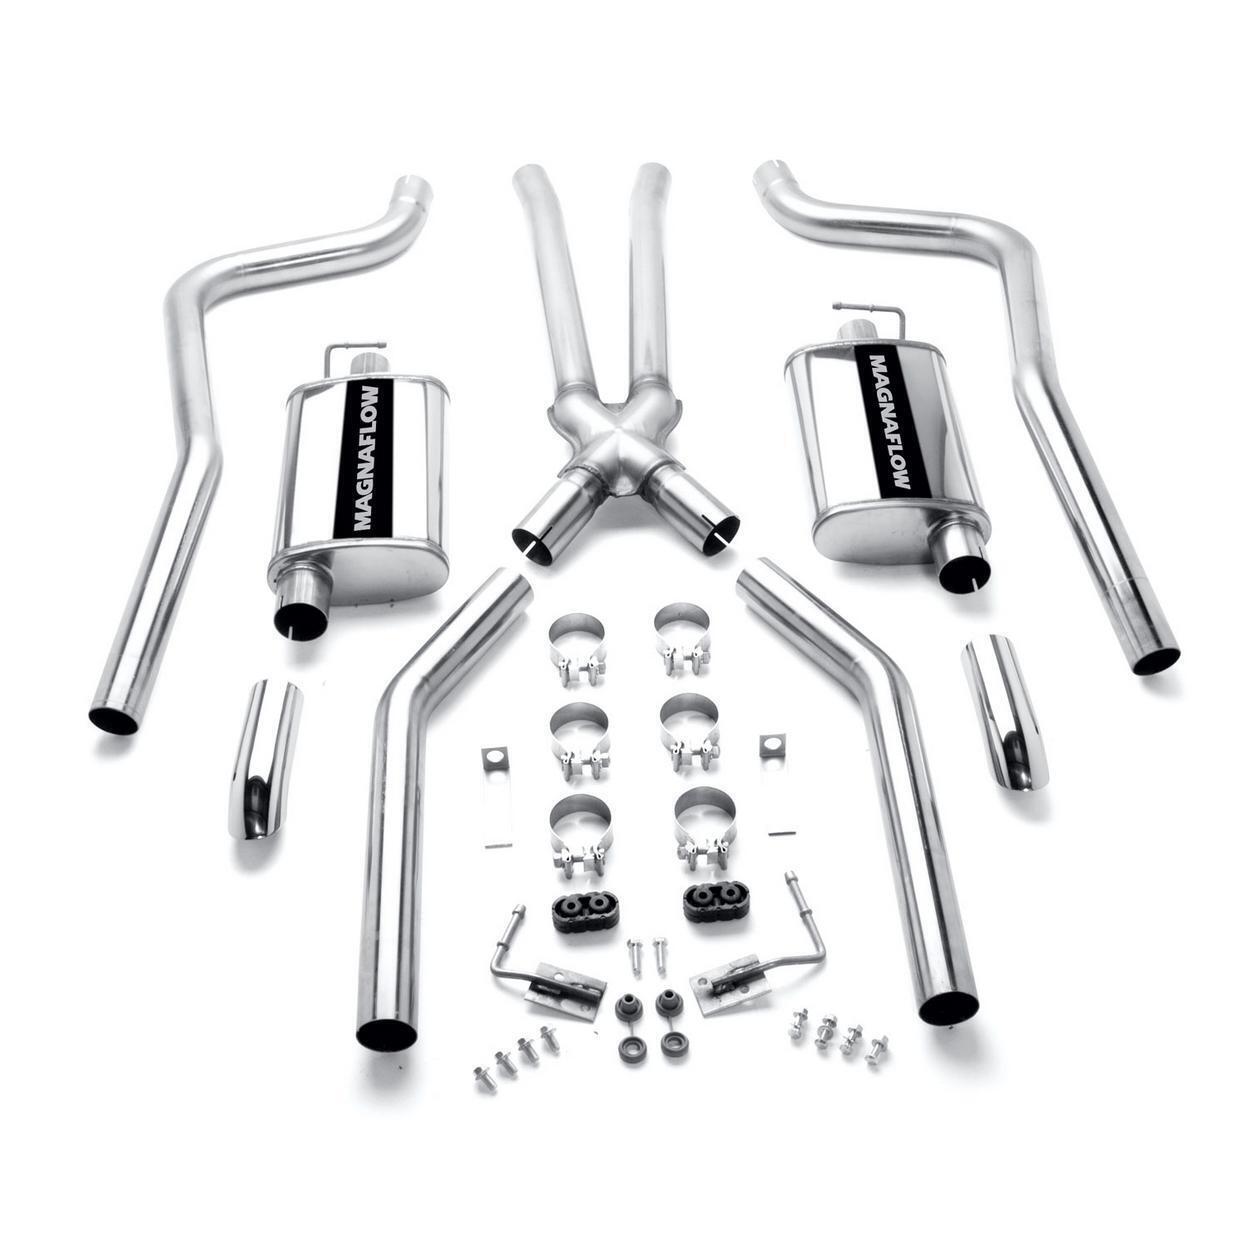 Magnaflow Exhaust System Kit for 1970 Plymouth Barracuda 5.2L V8 GAS OHV